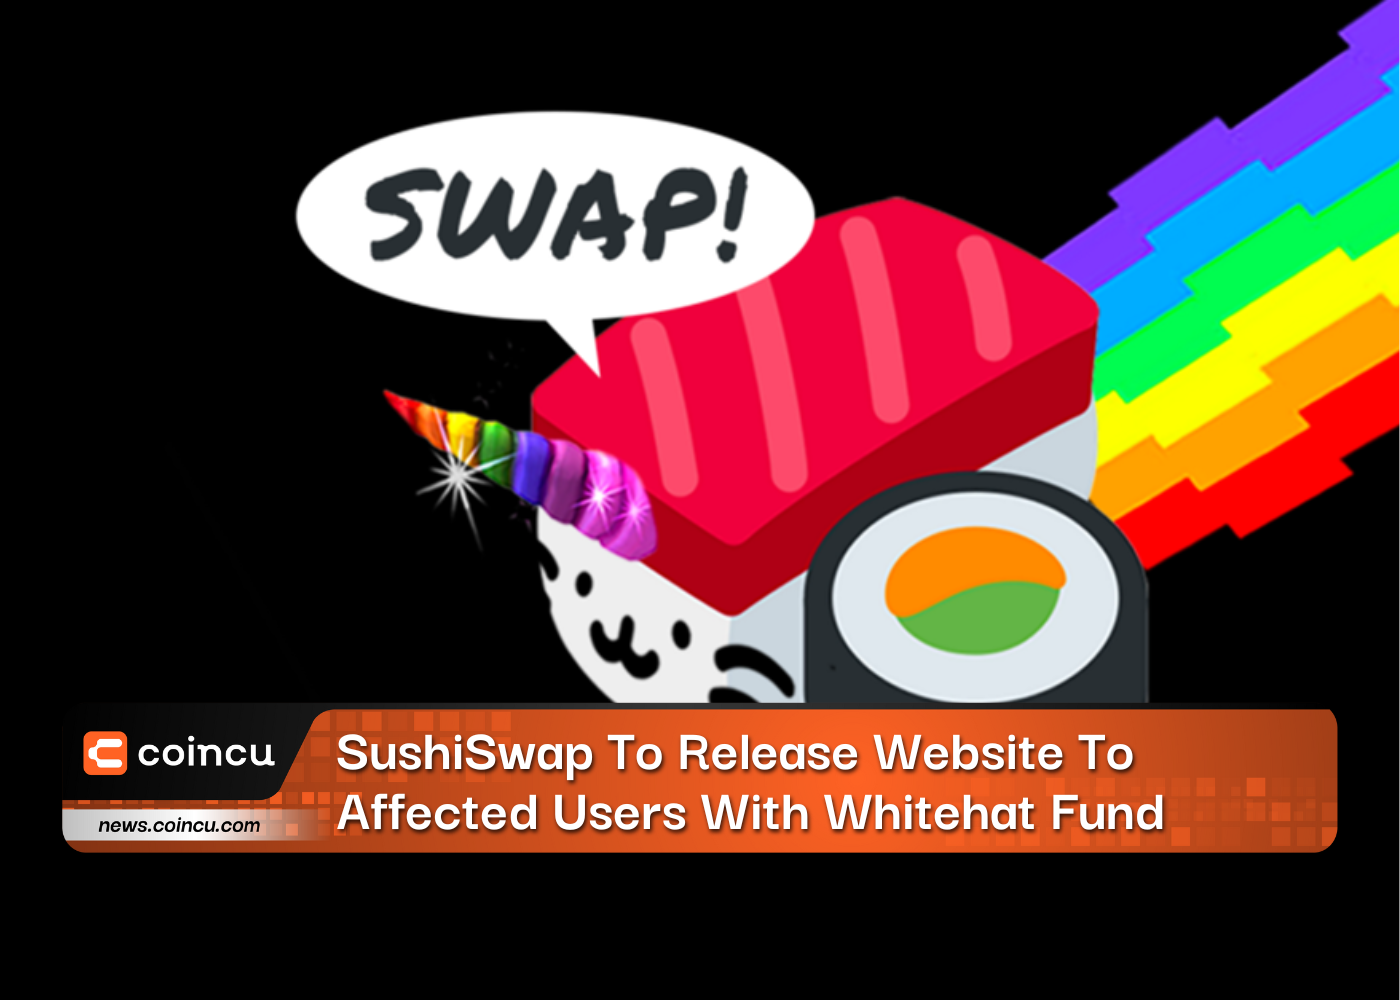 SushiSwap To Release Website To Affected Users With Whitehat Fund